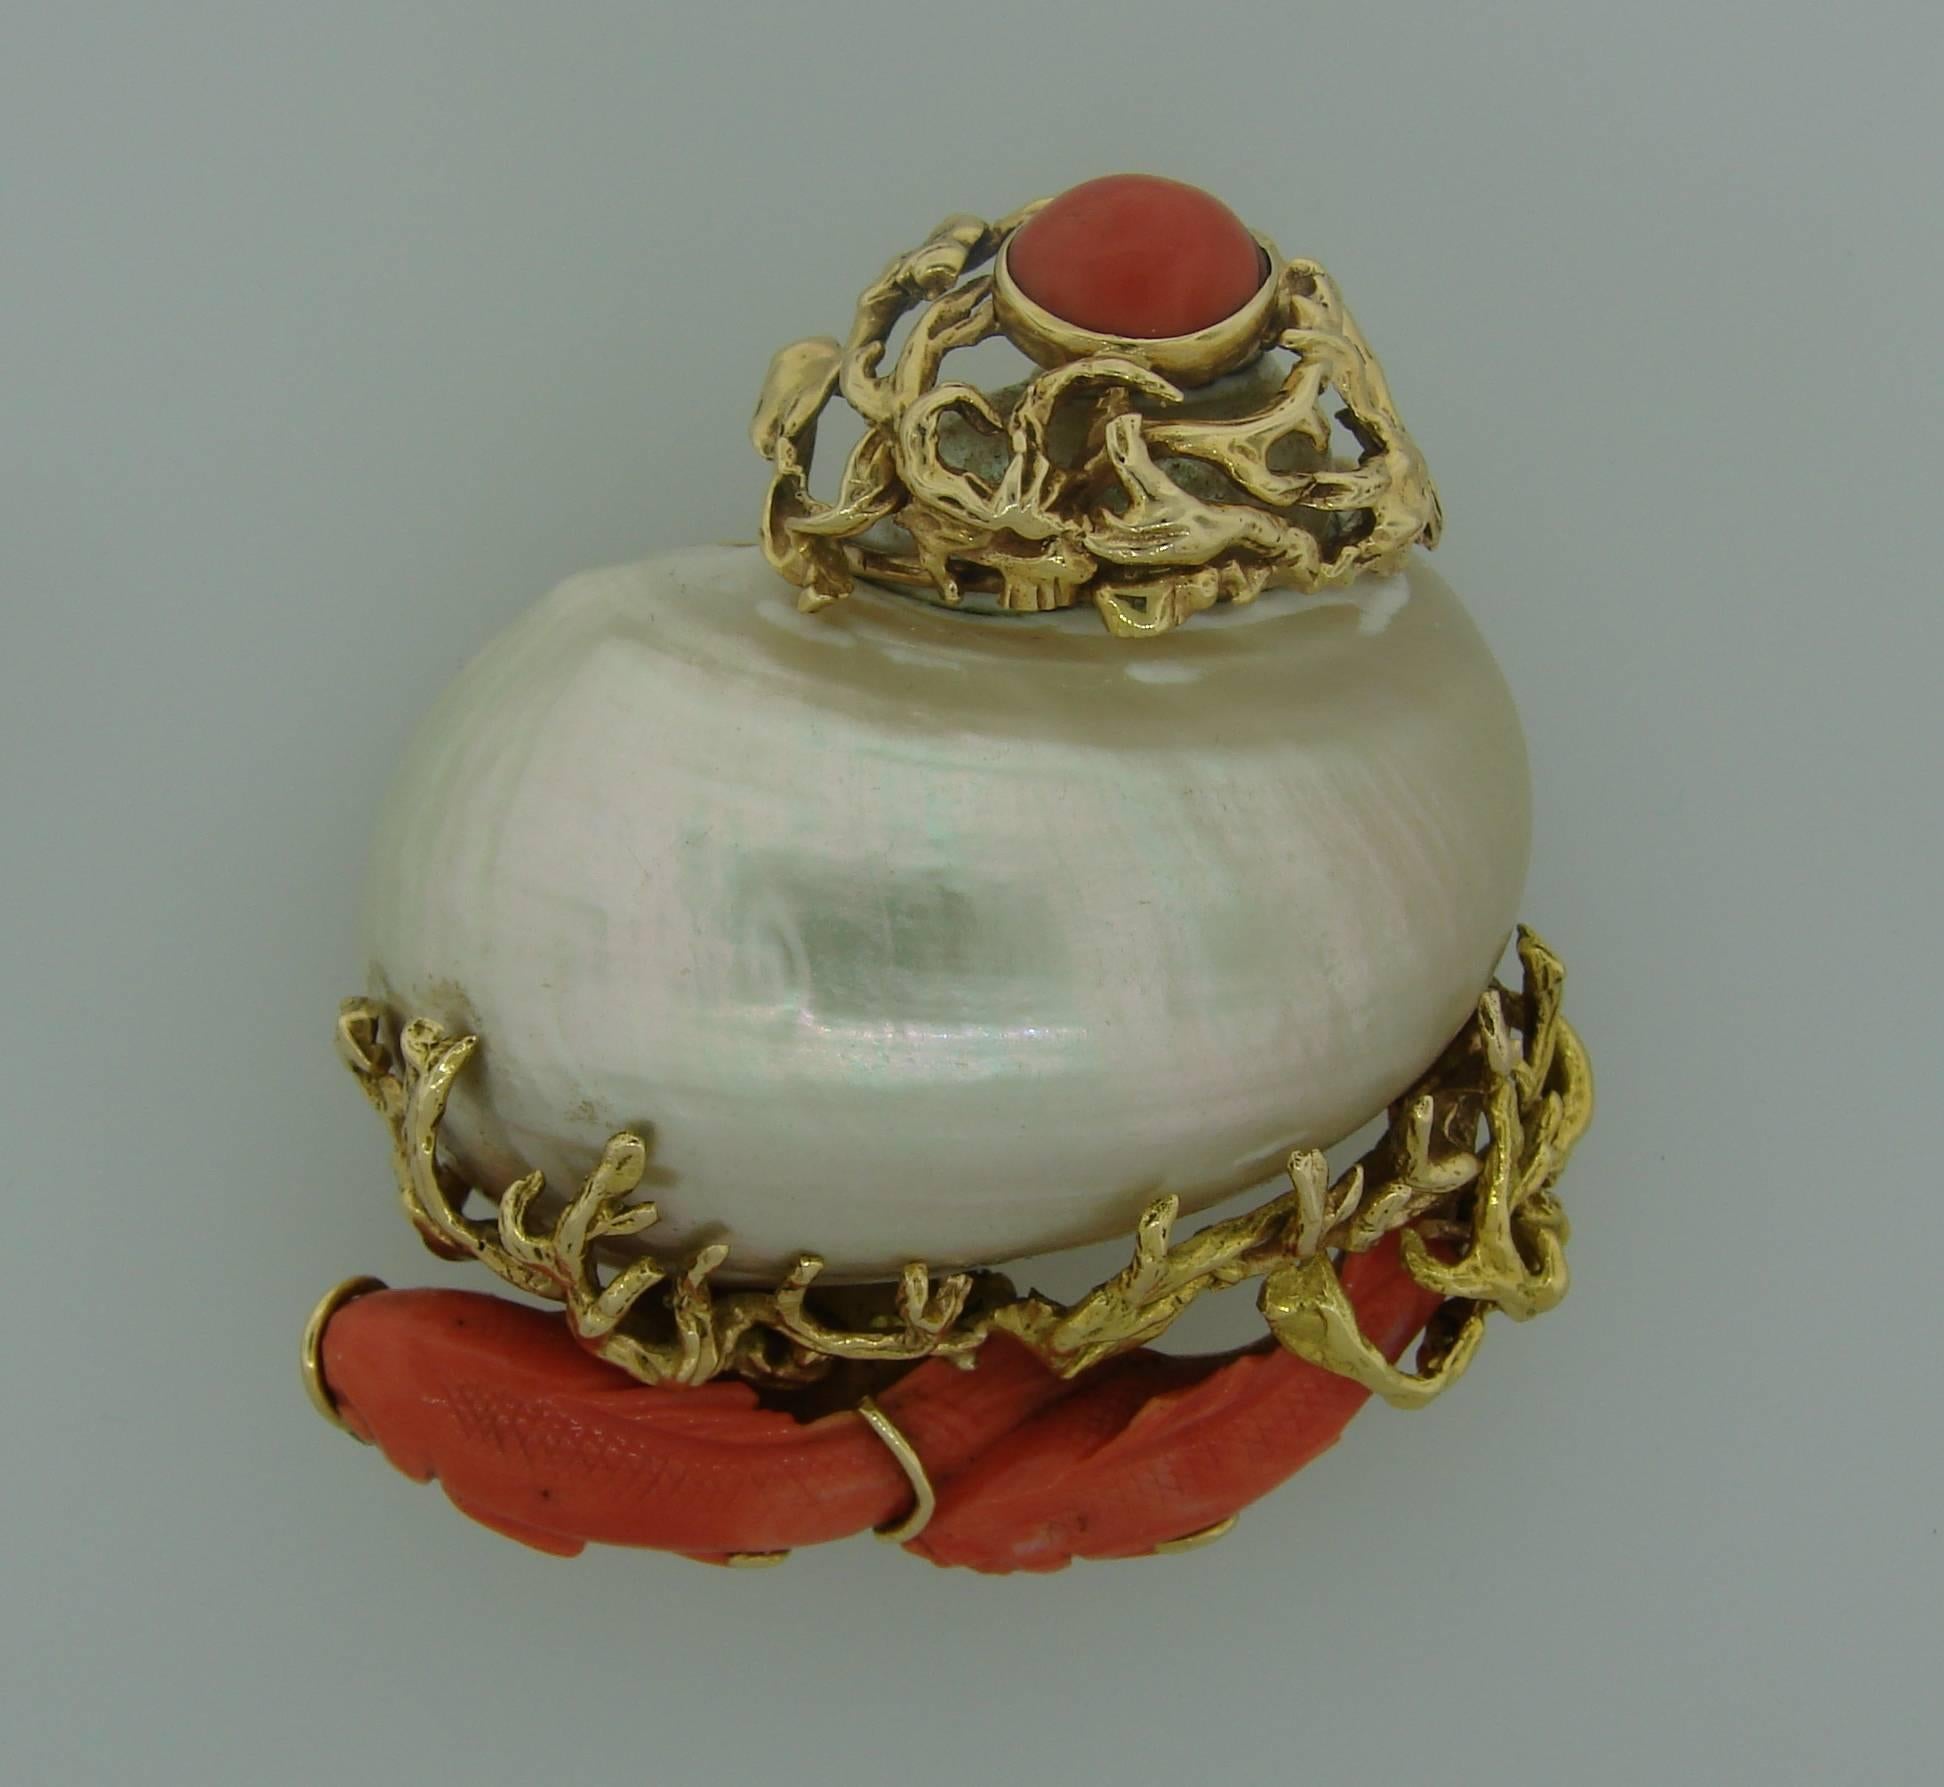 Prominent and colorful brooch created by Seaman Schepps in the 1950s. 
It features a white mother-of-pearl escargot shell set in 14 karat yellow gold and accented with carved and cabochon coral. 
The clip measures 2.5 x 2.25 x 1.25 inches and weighs